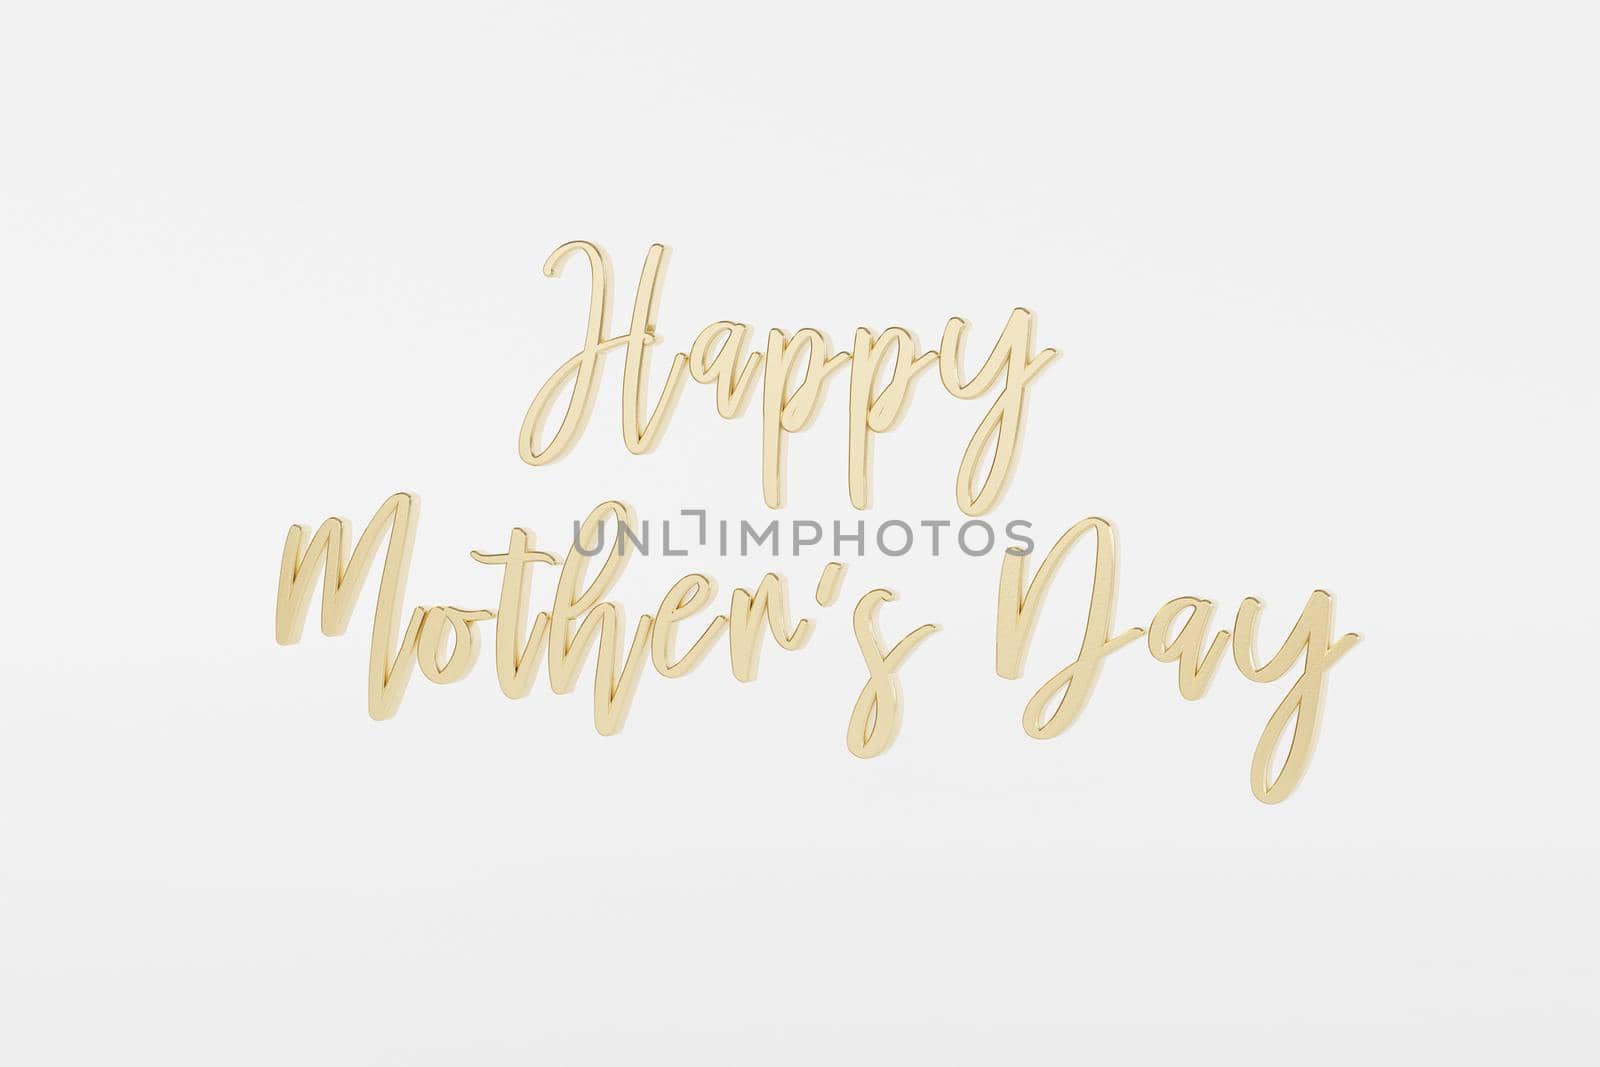 Mother's day greeting card, golden lettering text or calligraphy on white background, 3d render illustration by Frostroomhead